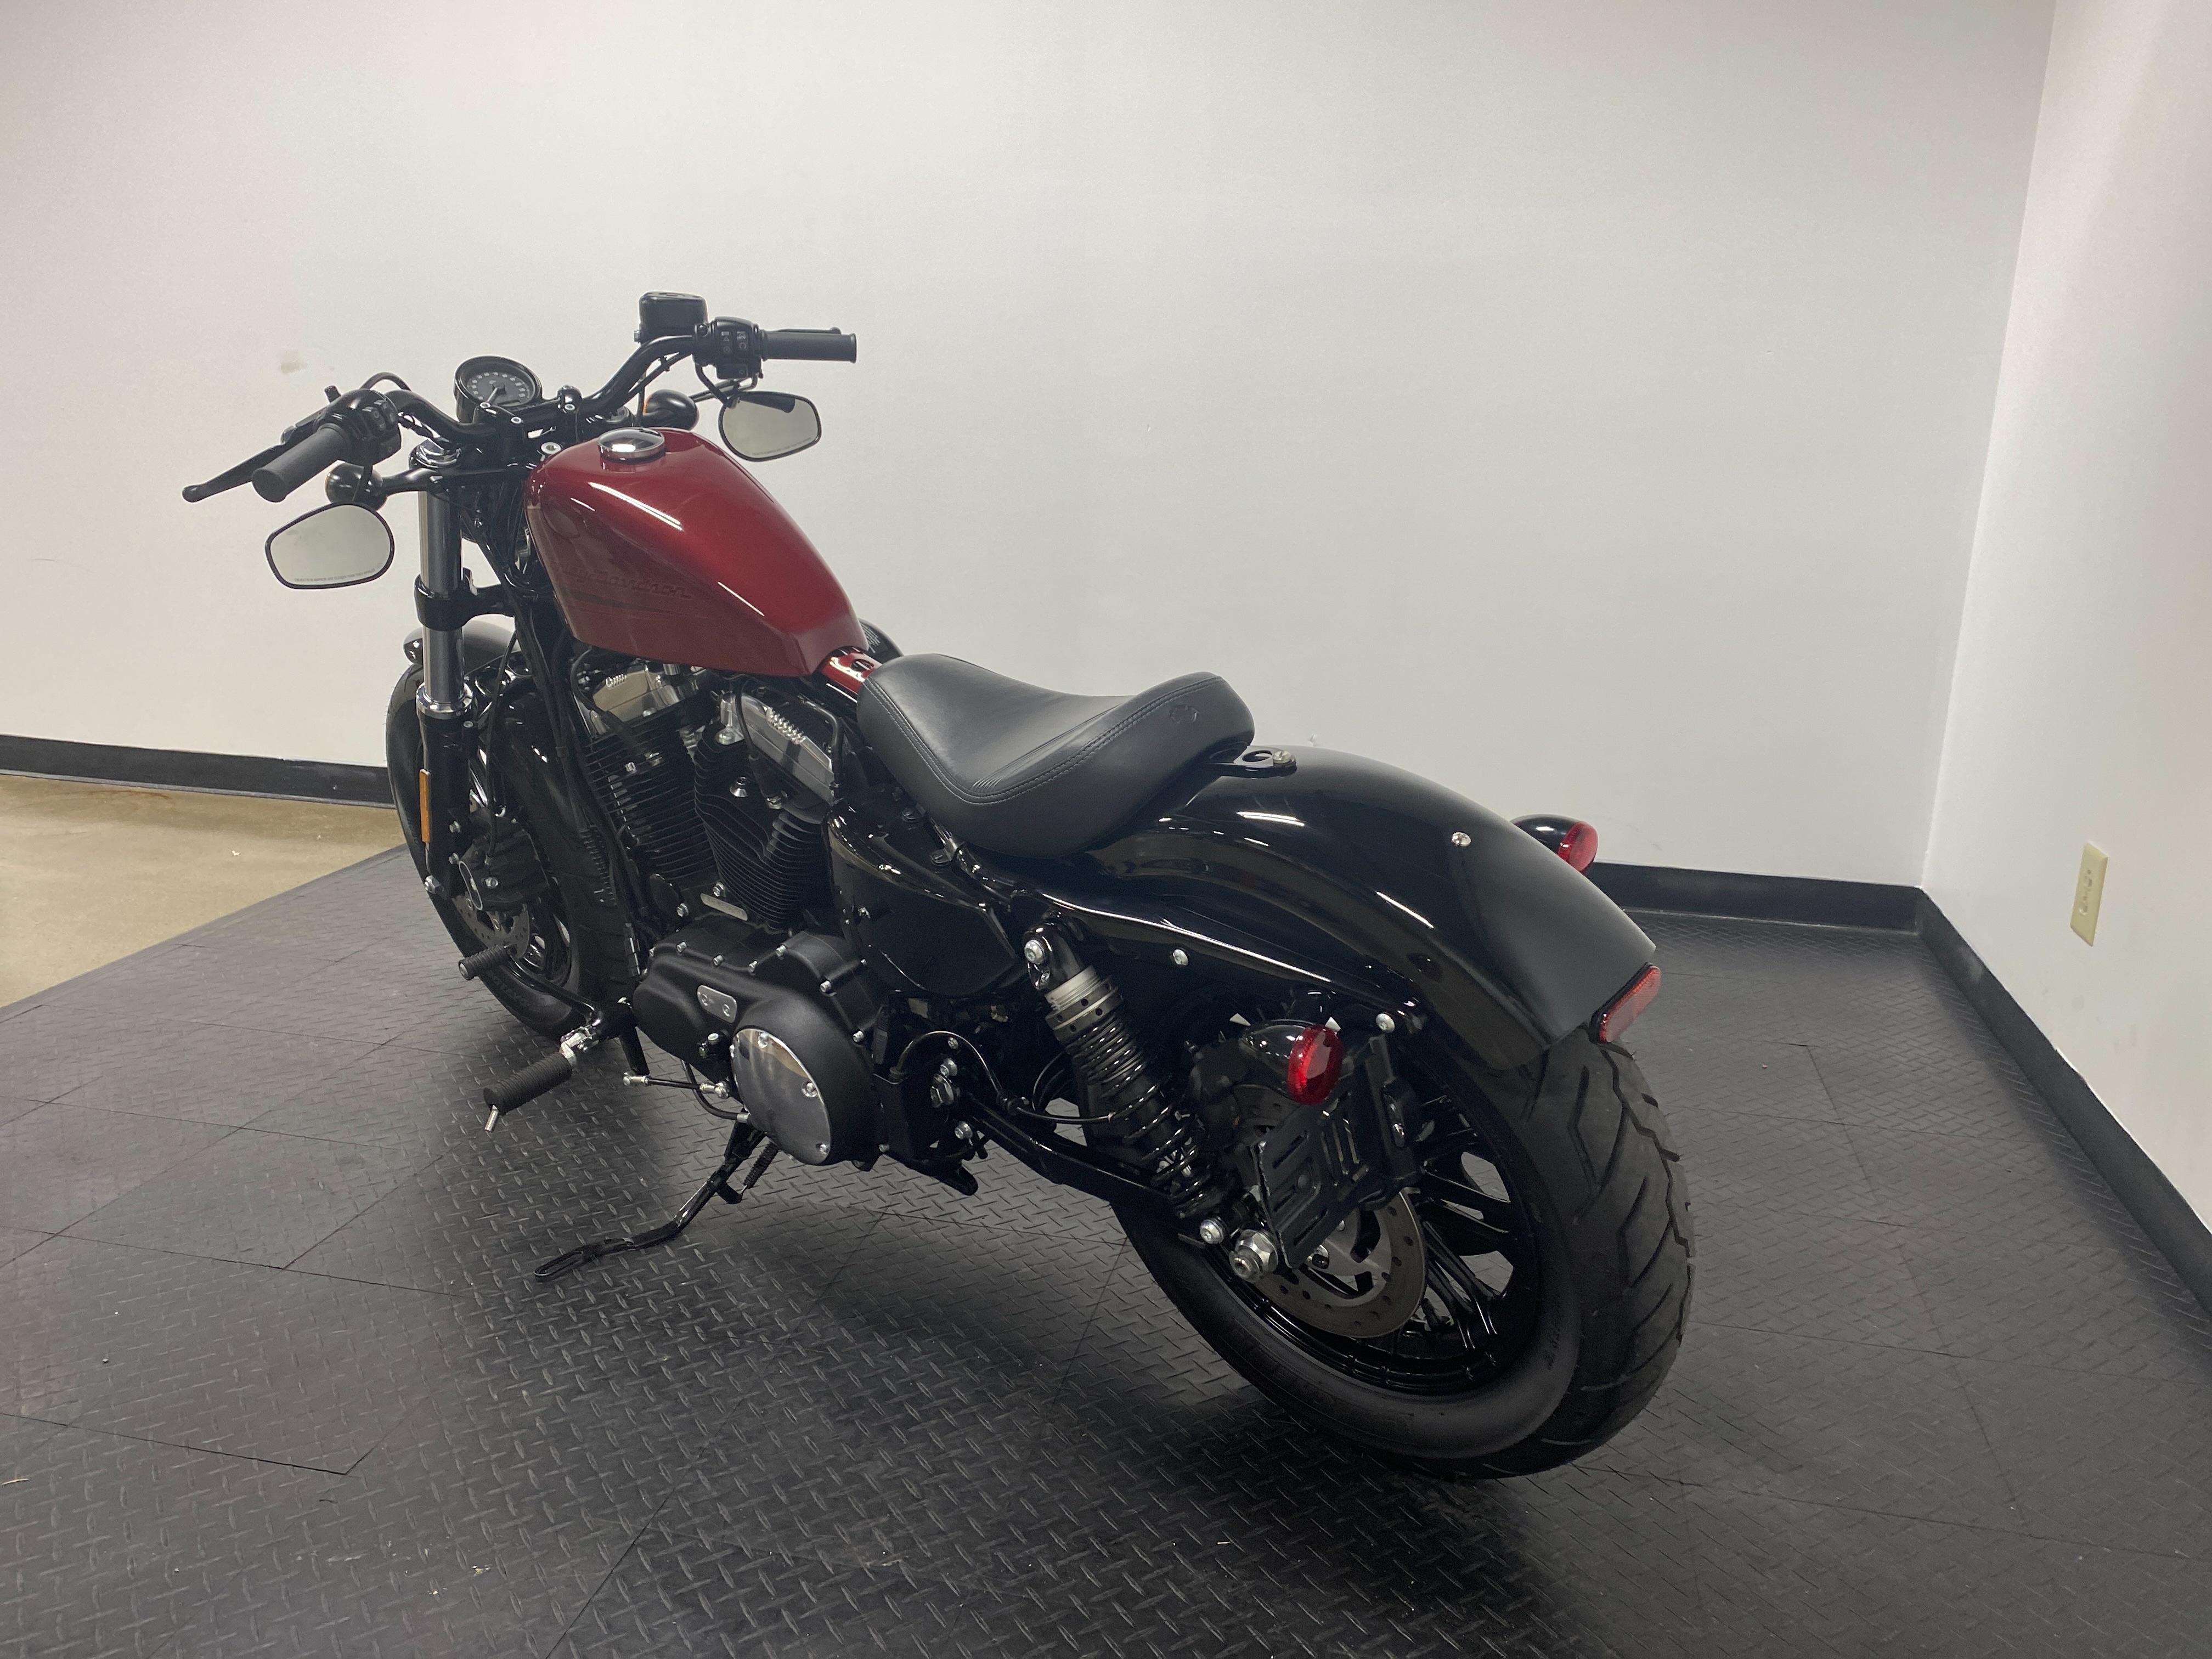 2020 Harley-Davidson Sportster Forty-Eight at Cannonball Harley-Davidson